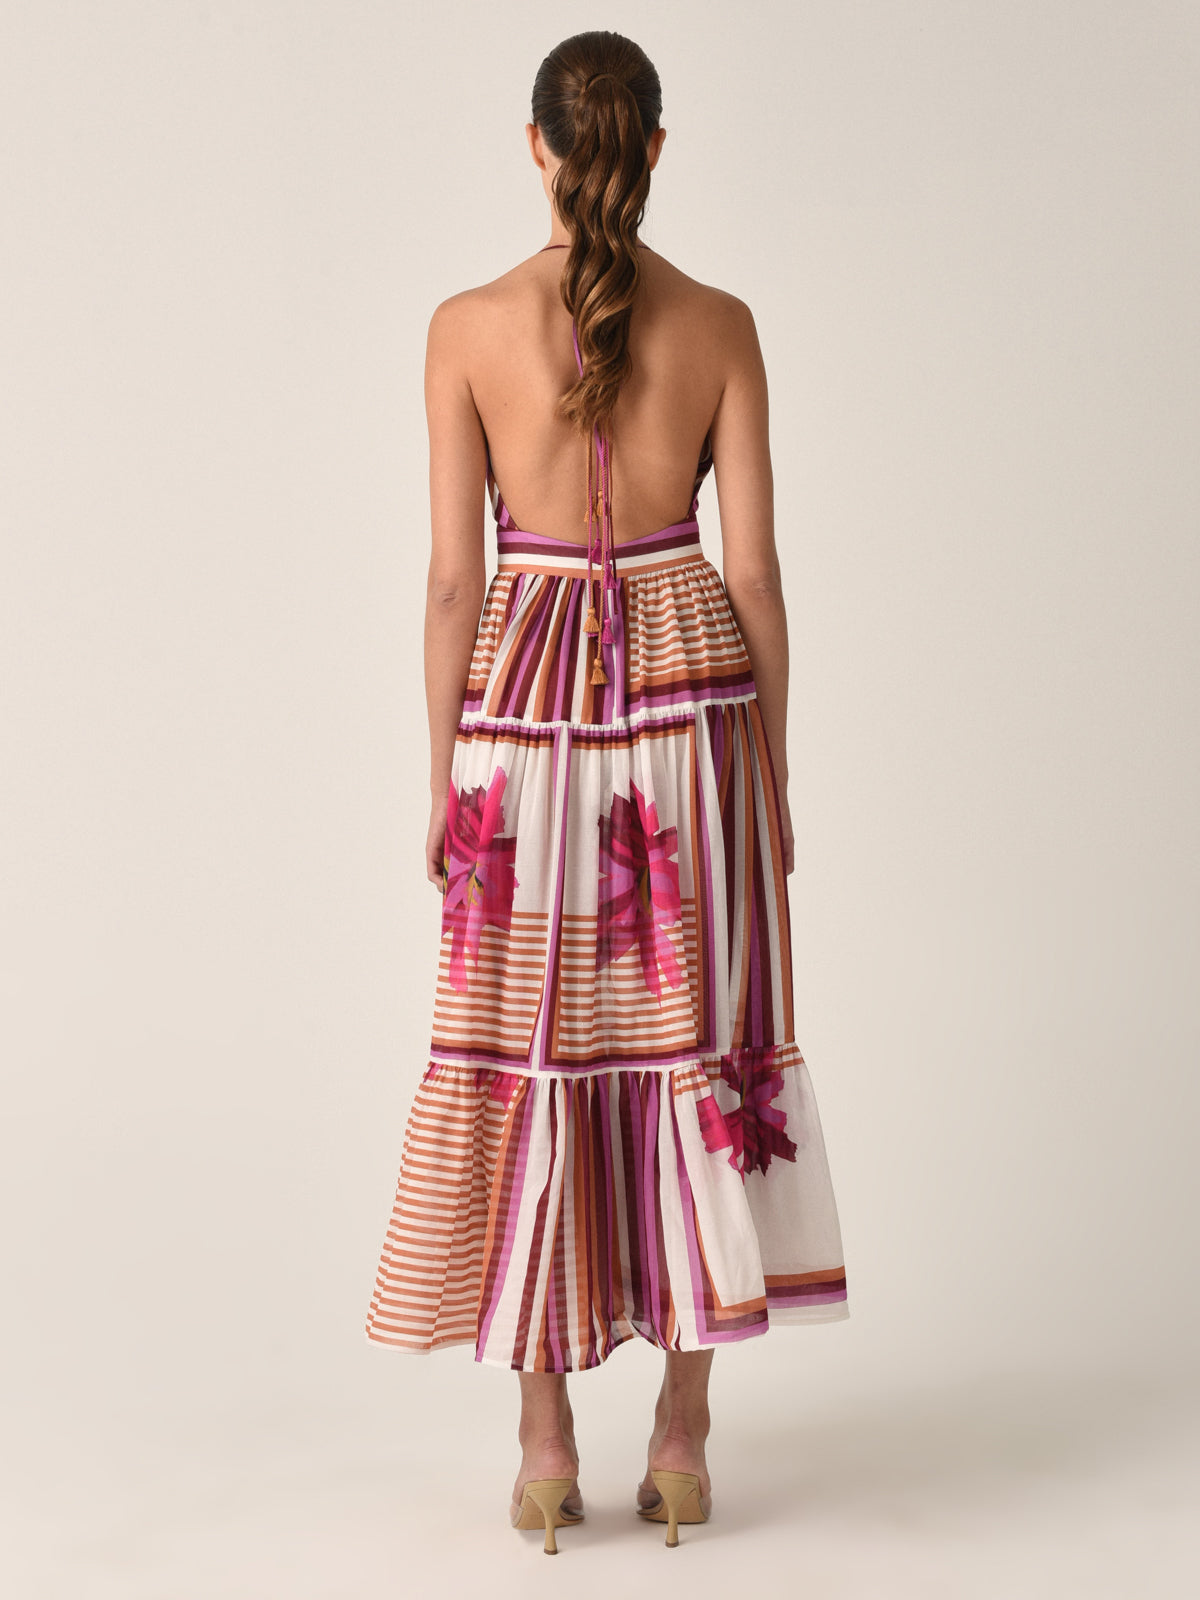 A Valerie Dress Magenta Floral Brushstroke Stripes with pink, peach, and white stripes and transparent sections with magenta floral brushstroke designs, isolated on a white background.